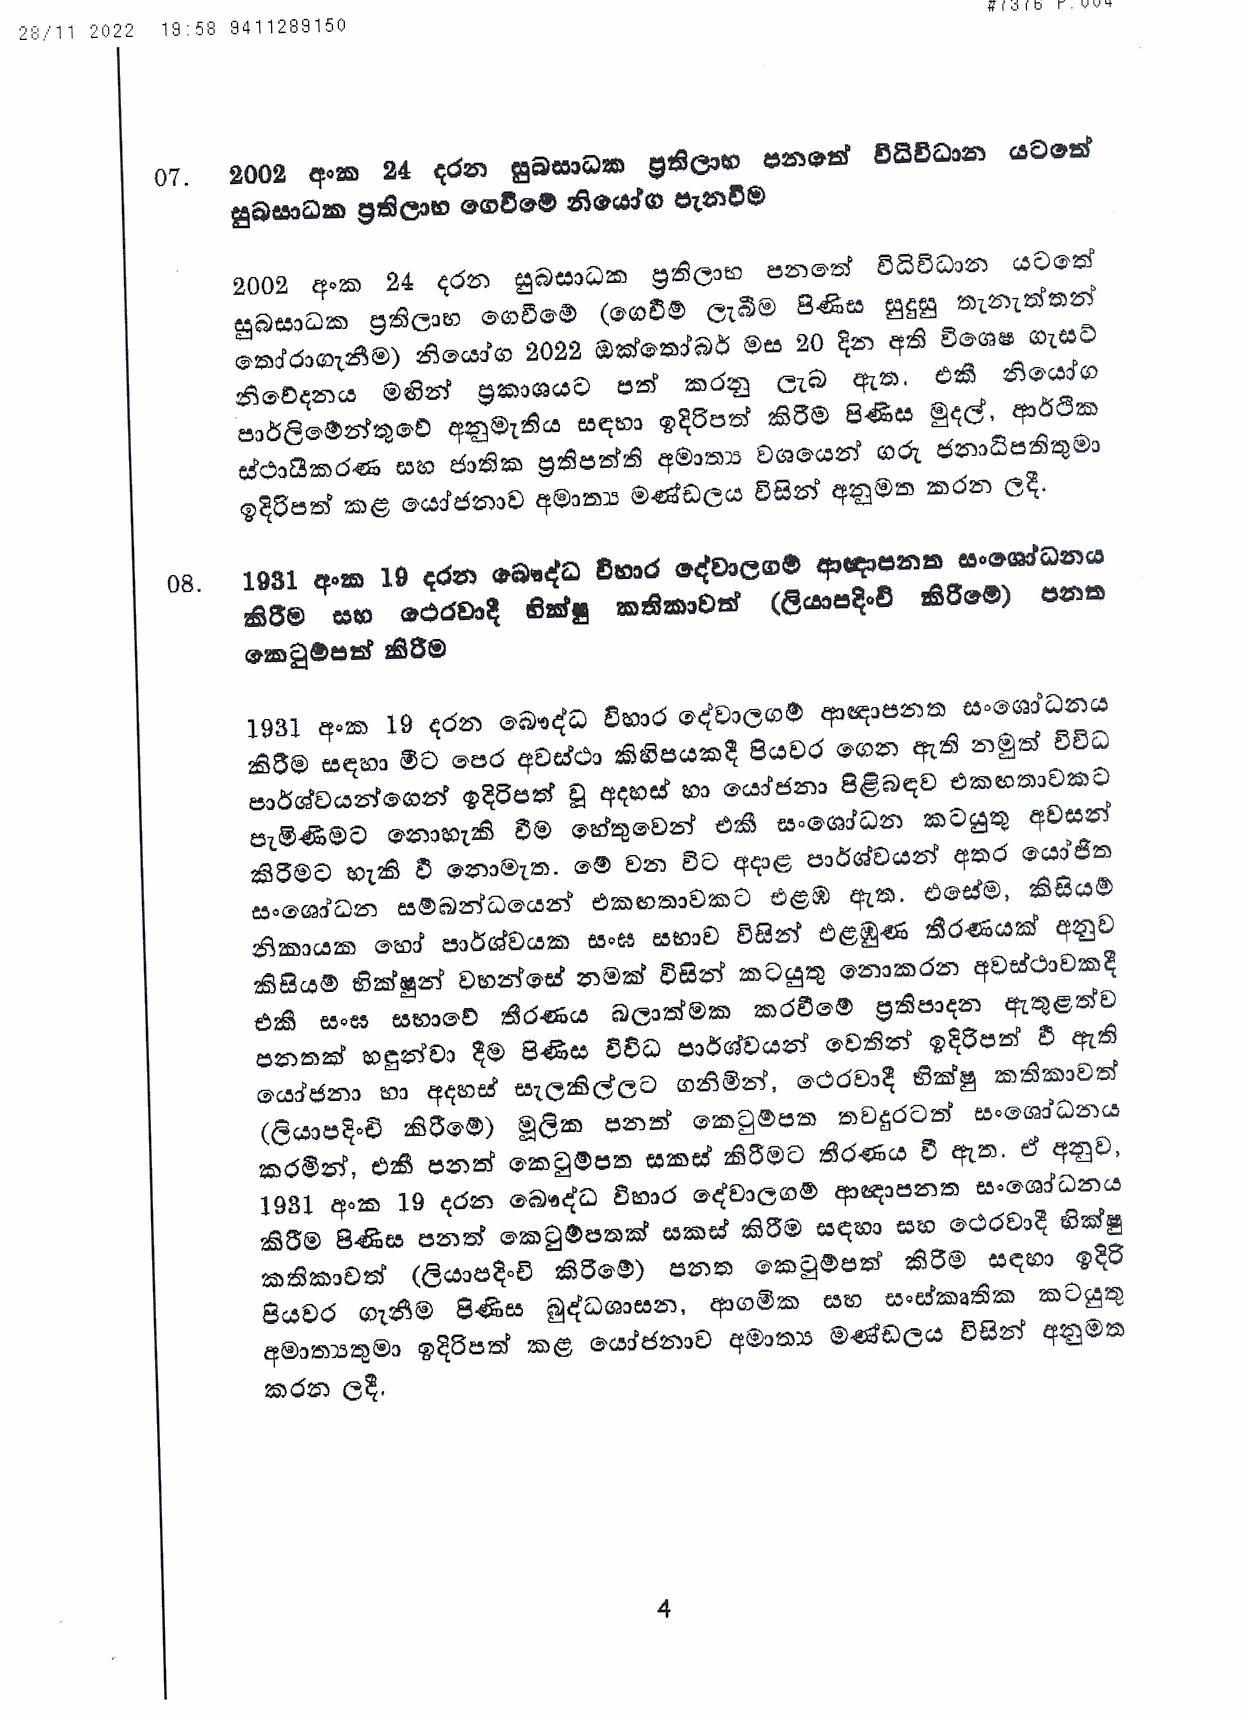 Cabinet Decision on 28.11.2022 page 004